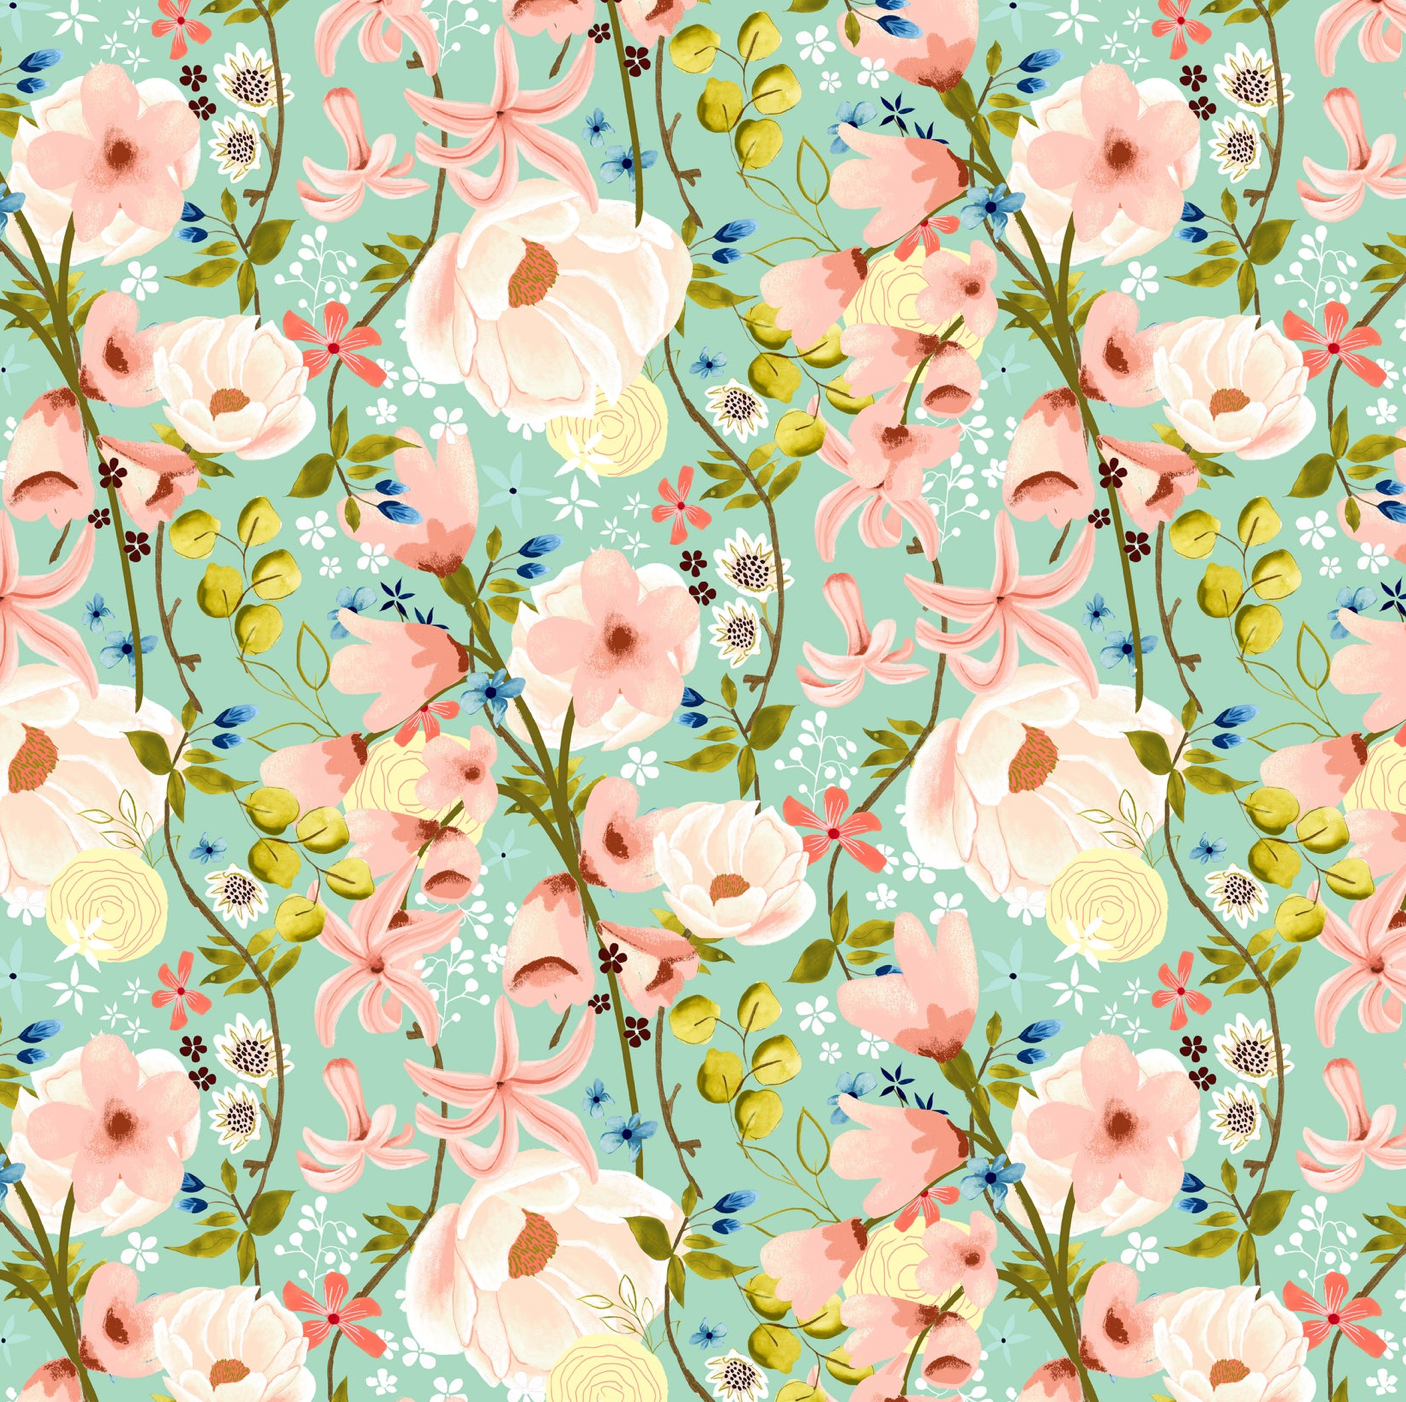 Serenity Blooms, Woven Memories Mint, SR24517, sold by the 1/2 yard, *PREORDER - Good Vibes Quilt Shop